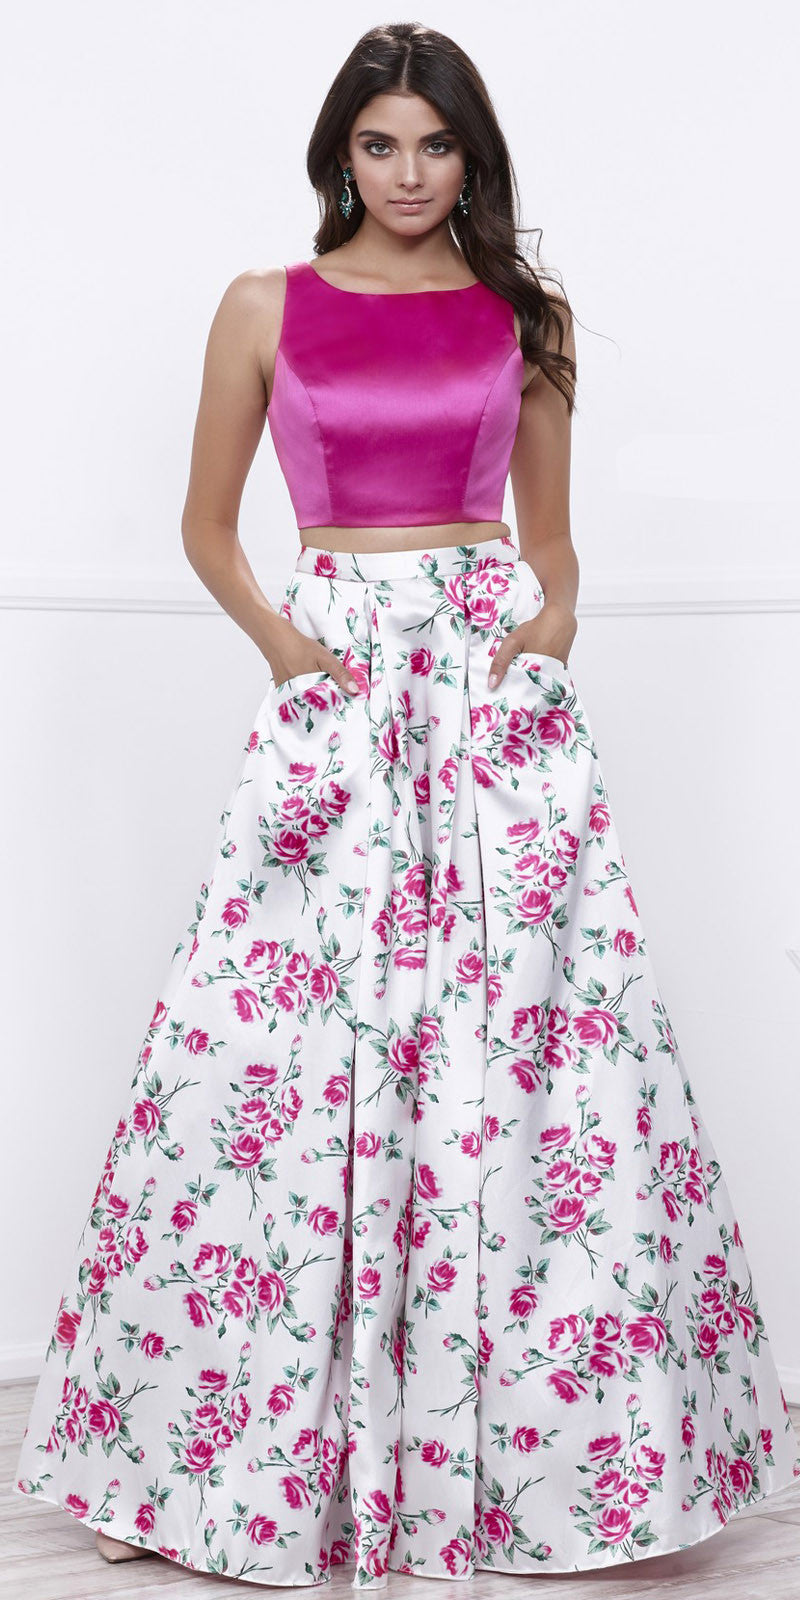 Survive alaska long satin prom dress with pockets remover buttons online